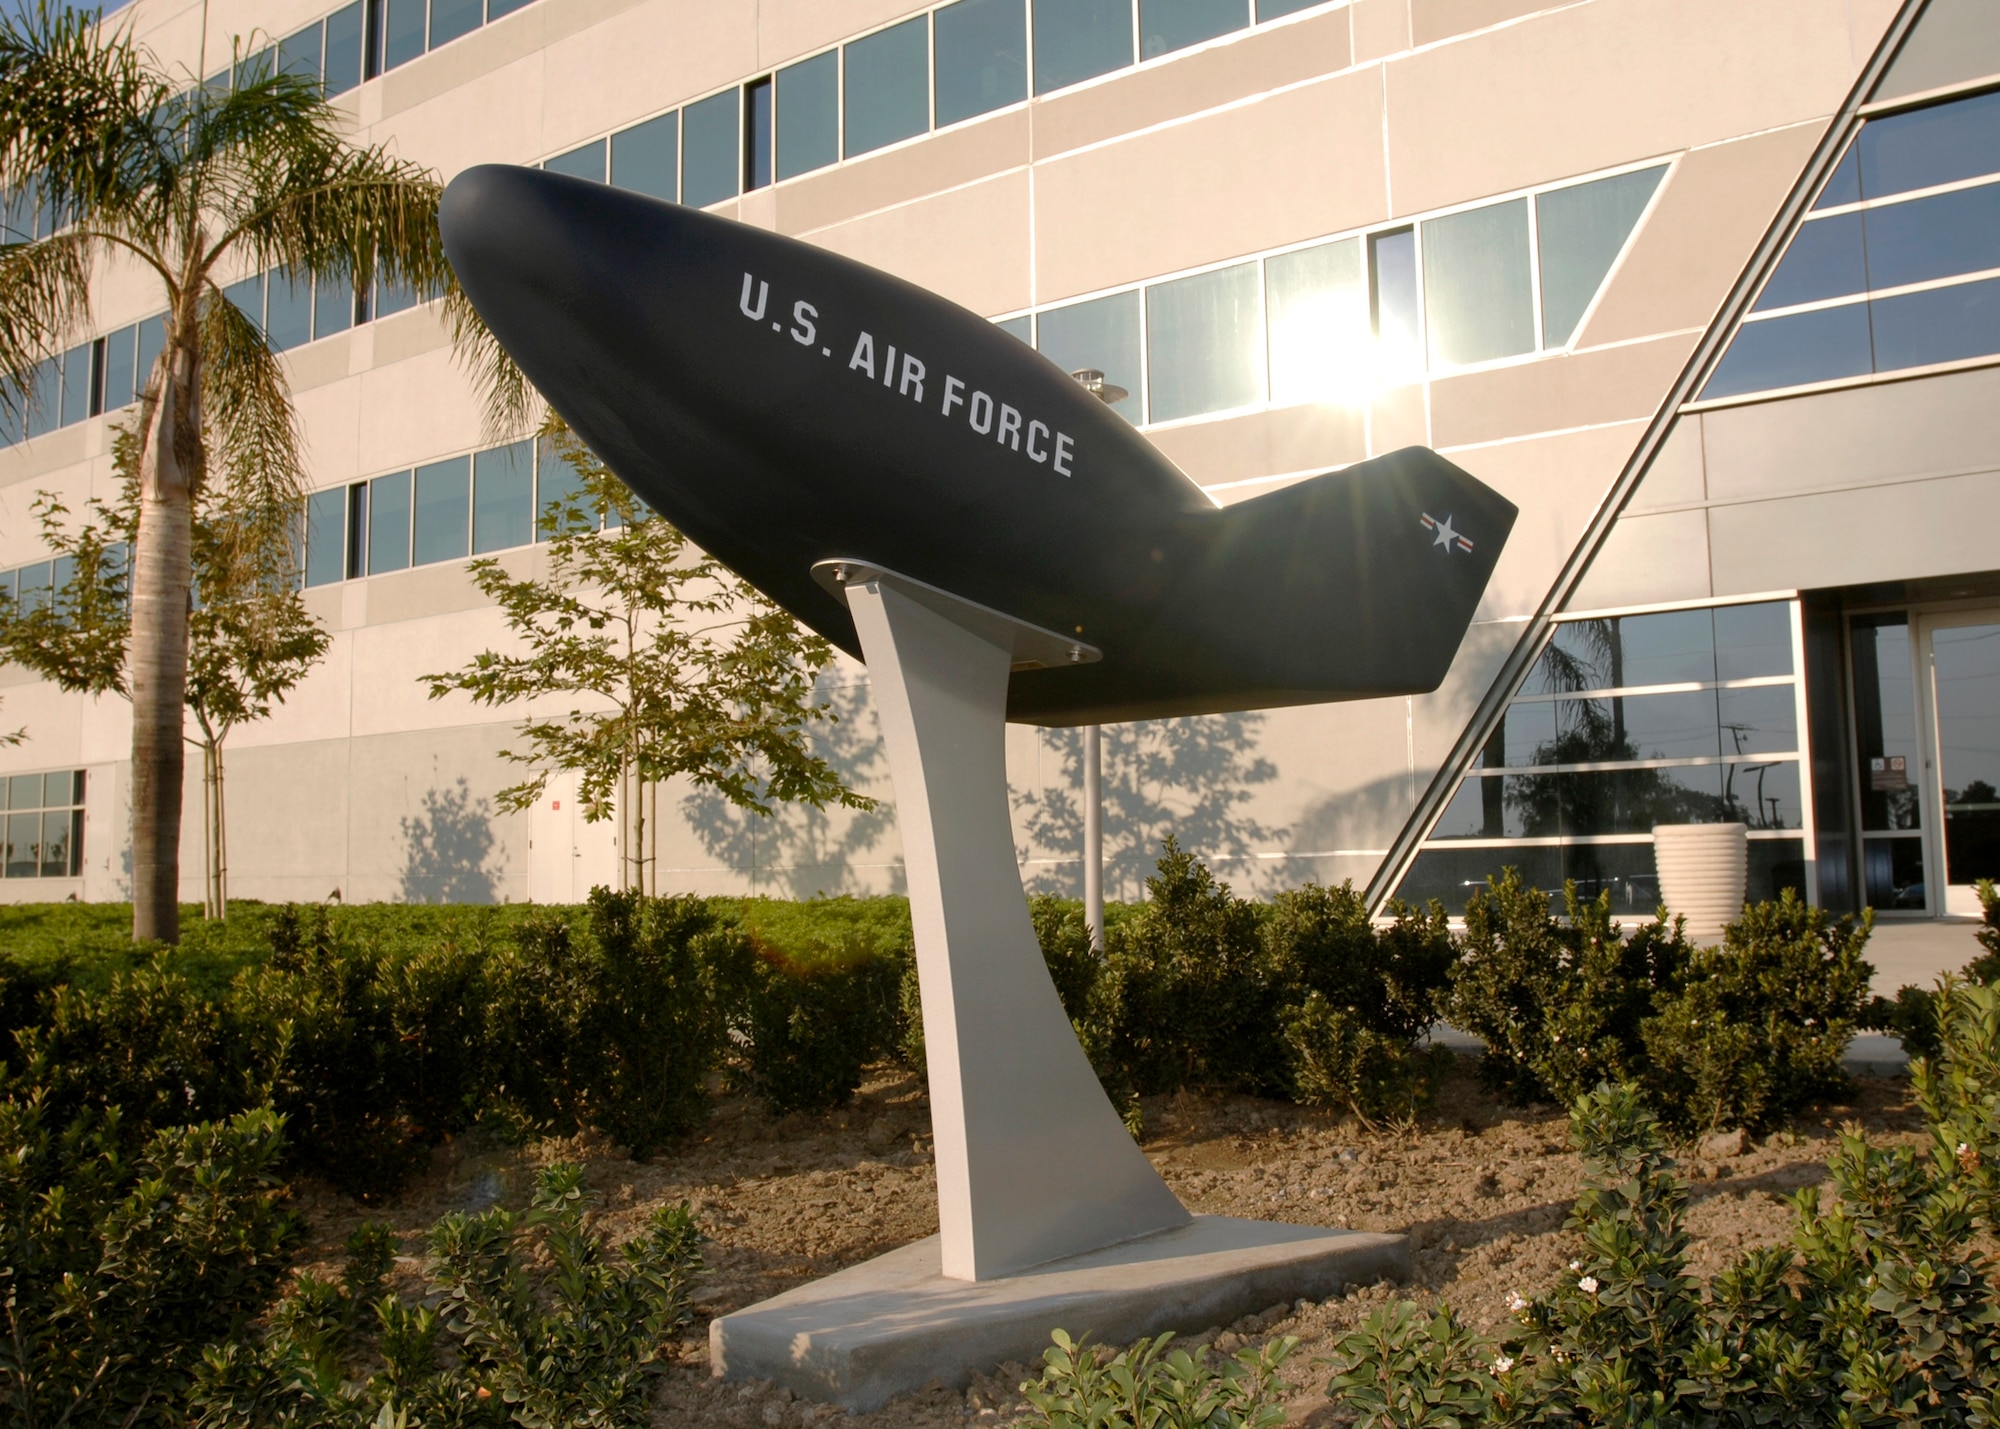 A replica of a SV-5D lifting body was recently installed in front of Bldg. 270.  Originally developed for SMC’s predecessor the Space and Missile Systems Organization’s Project Prime, the lifting body was the first vehicle to maneuver on reentry from space. Information gathered from this program aided in the development of future Air Force and NASA lifting body vehicles including NASA’s Space Shuttle. The replica was presented to SAMSO in 1974 by the Junior Officers Council. (Photo by Lou Hernandez)